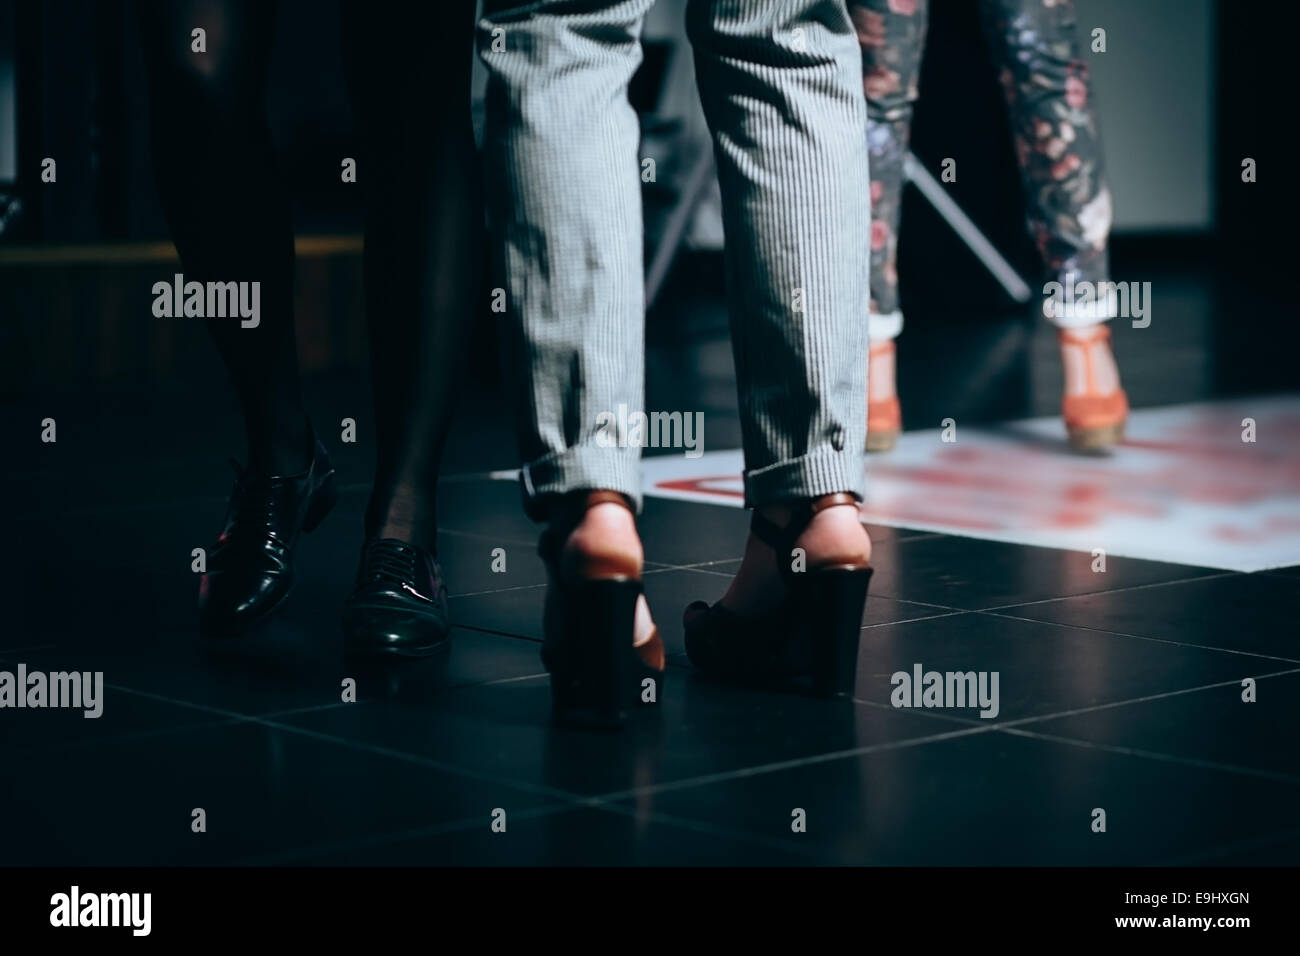 Dancing legs on the floor of night club. Shallow depth of field Stock Photo